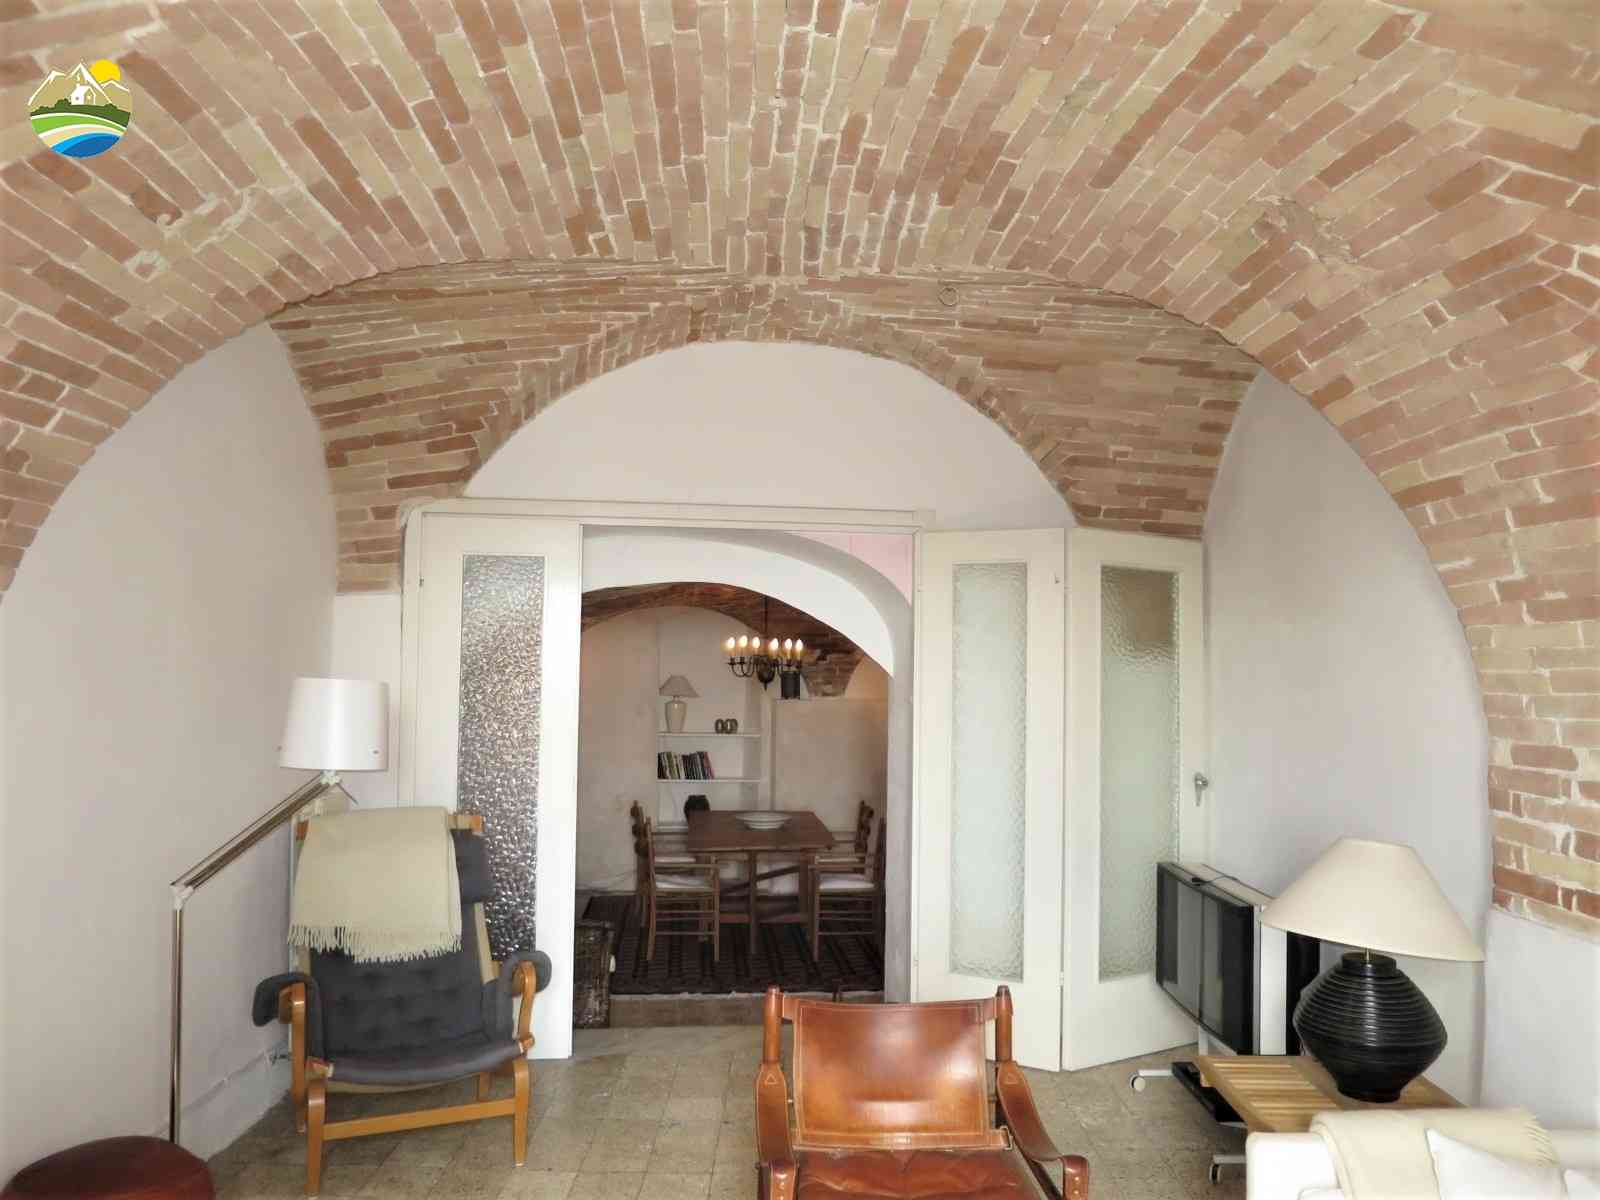 Townhouse Townhouse for sale Penne (PE), Casa Roma - Penne - EUR 106.178 10 small